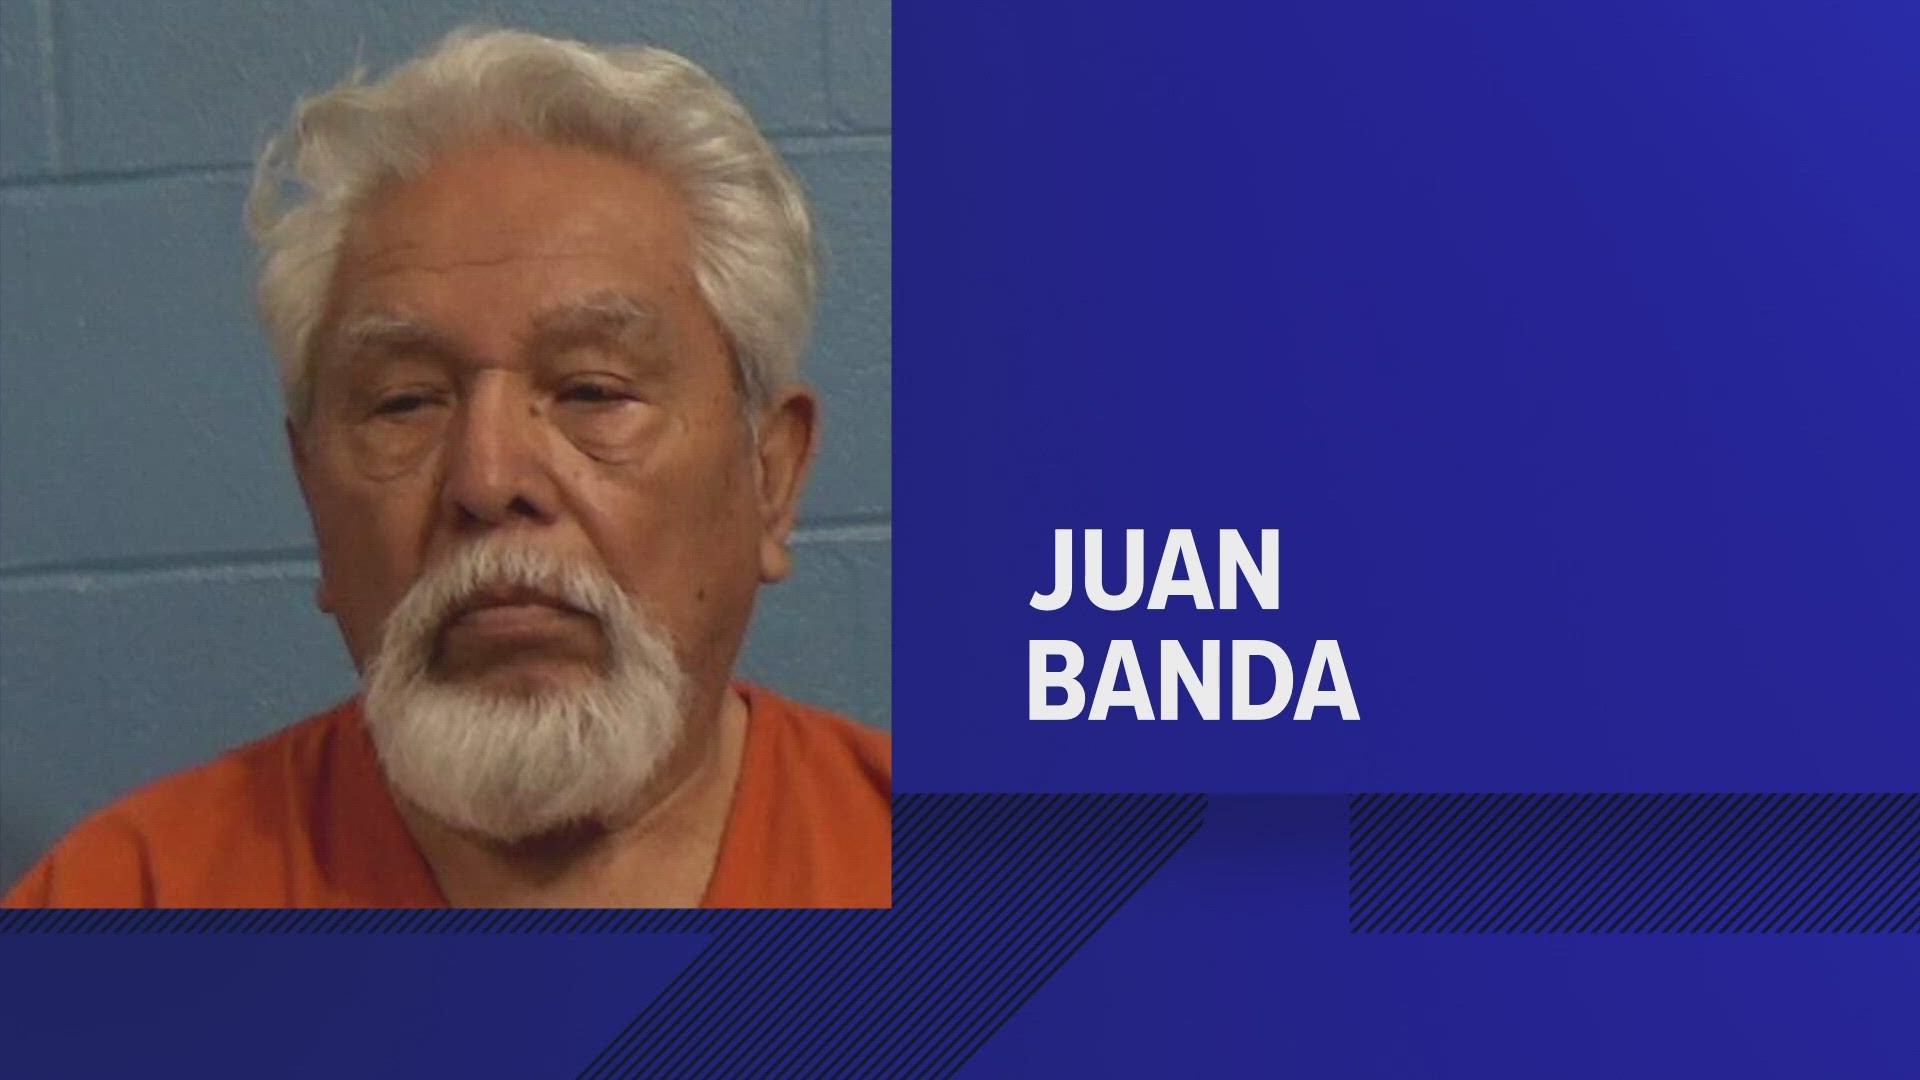 Juan J. Banda is accused of abusing four victims under the age of 14 between the years of 2007 and 2012.